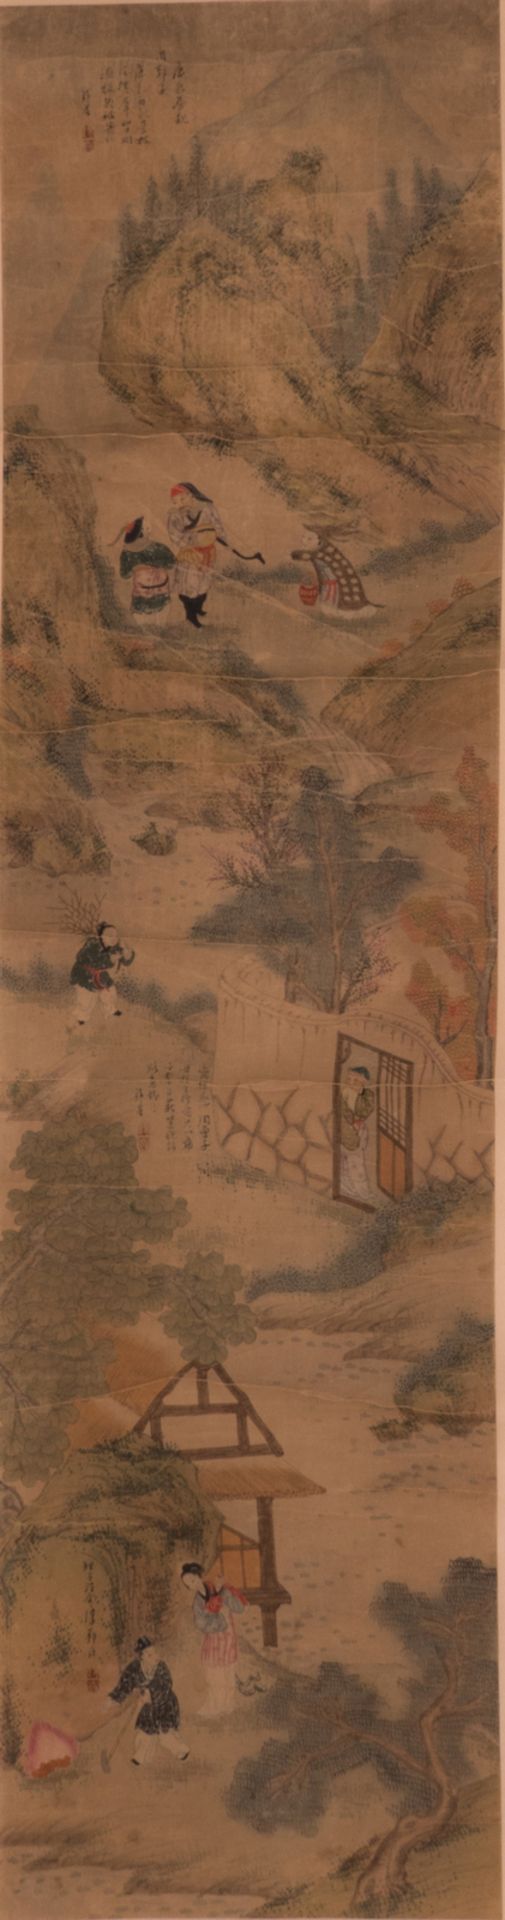 A Chinese scroll depicting animated scenes in a landscape, 19thC, 30,6 x 120 - 39,2 x 166 cm (with